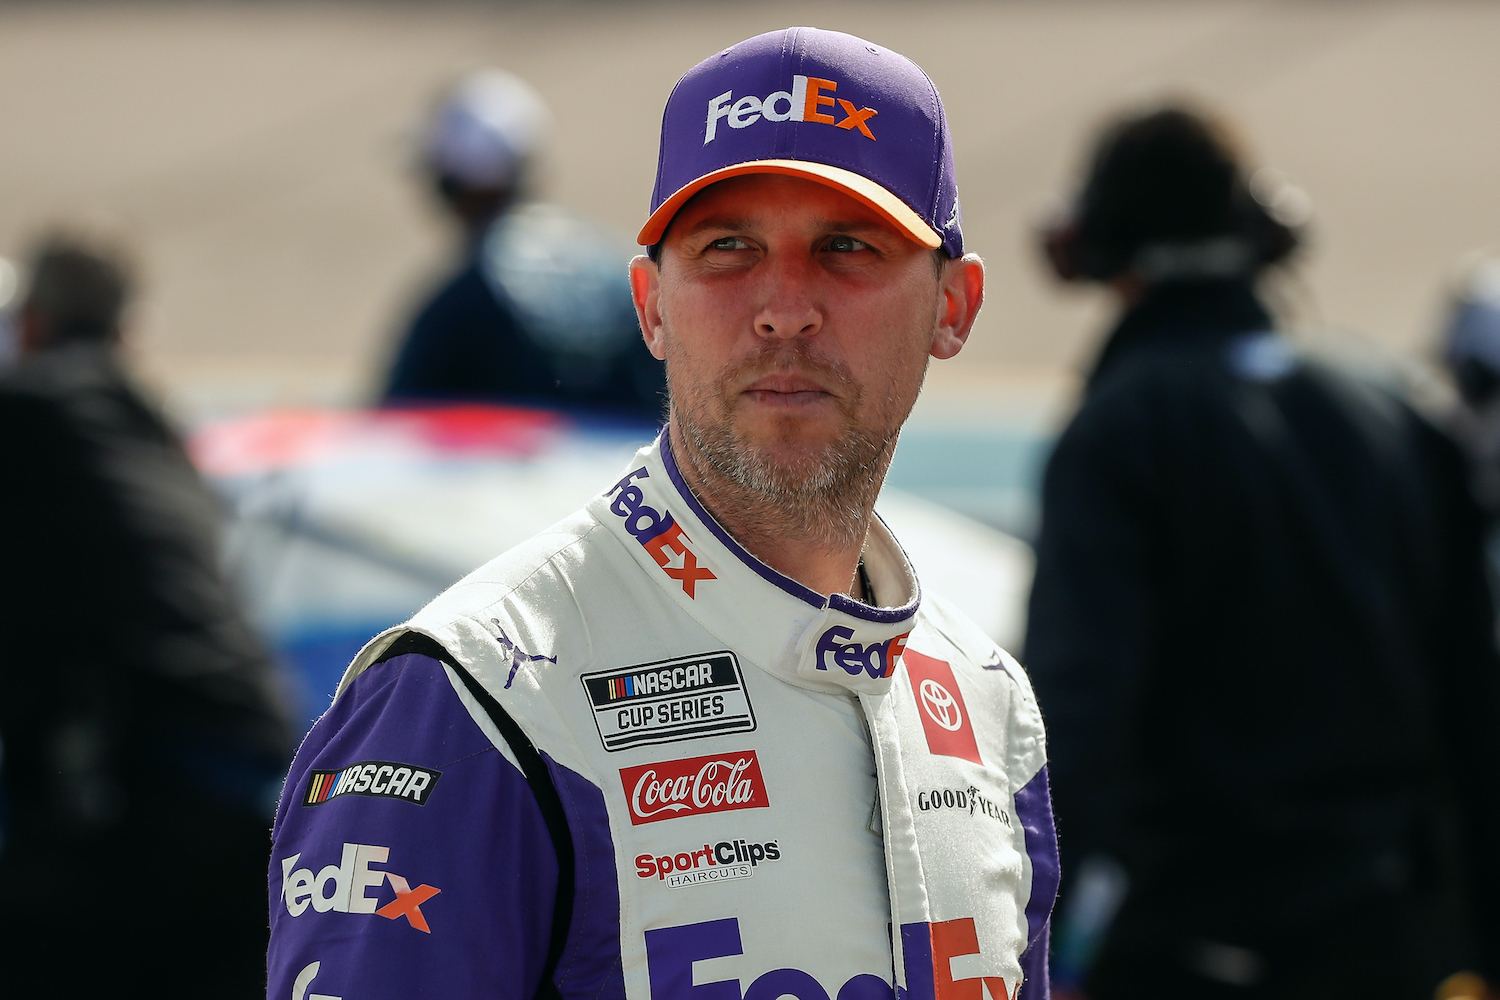 Denny Hamlin Shares Conflicts With Chase Elliott and Others in Latest Social Media Video; Fans Respond in Unexpected Way